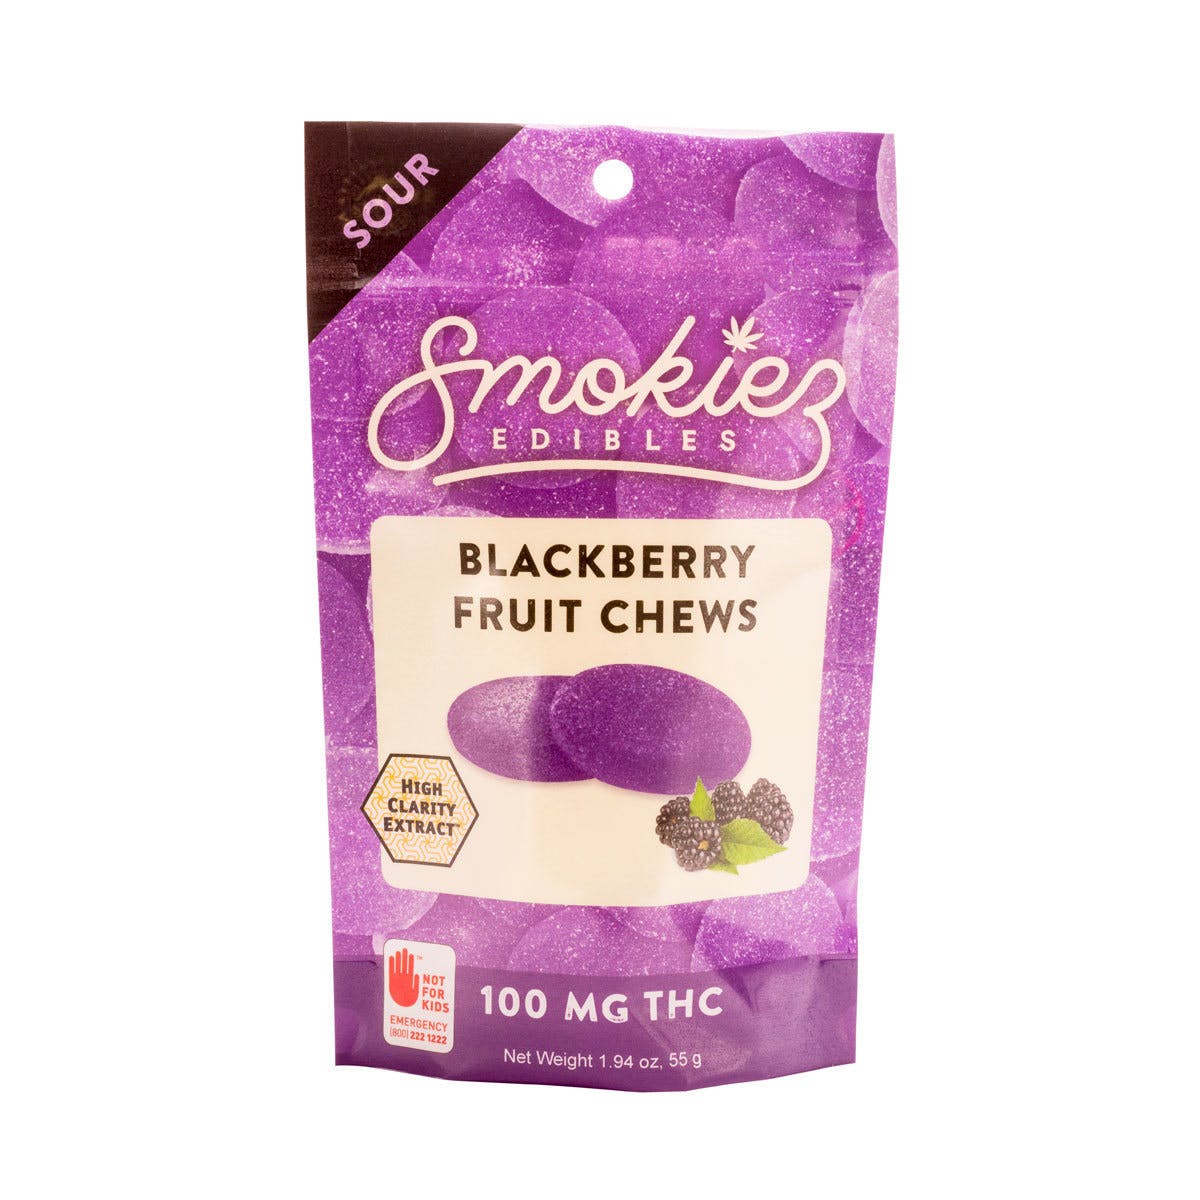 marijuana-dispensaries-the-peoples-remedy-patterson-in-patterson-sour-blackberry-fruit-chews-2c-100-mg